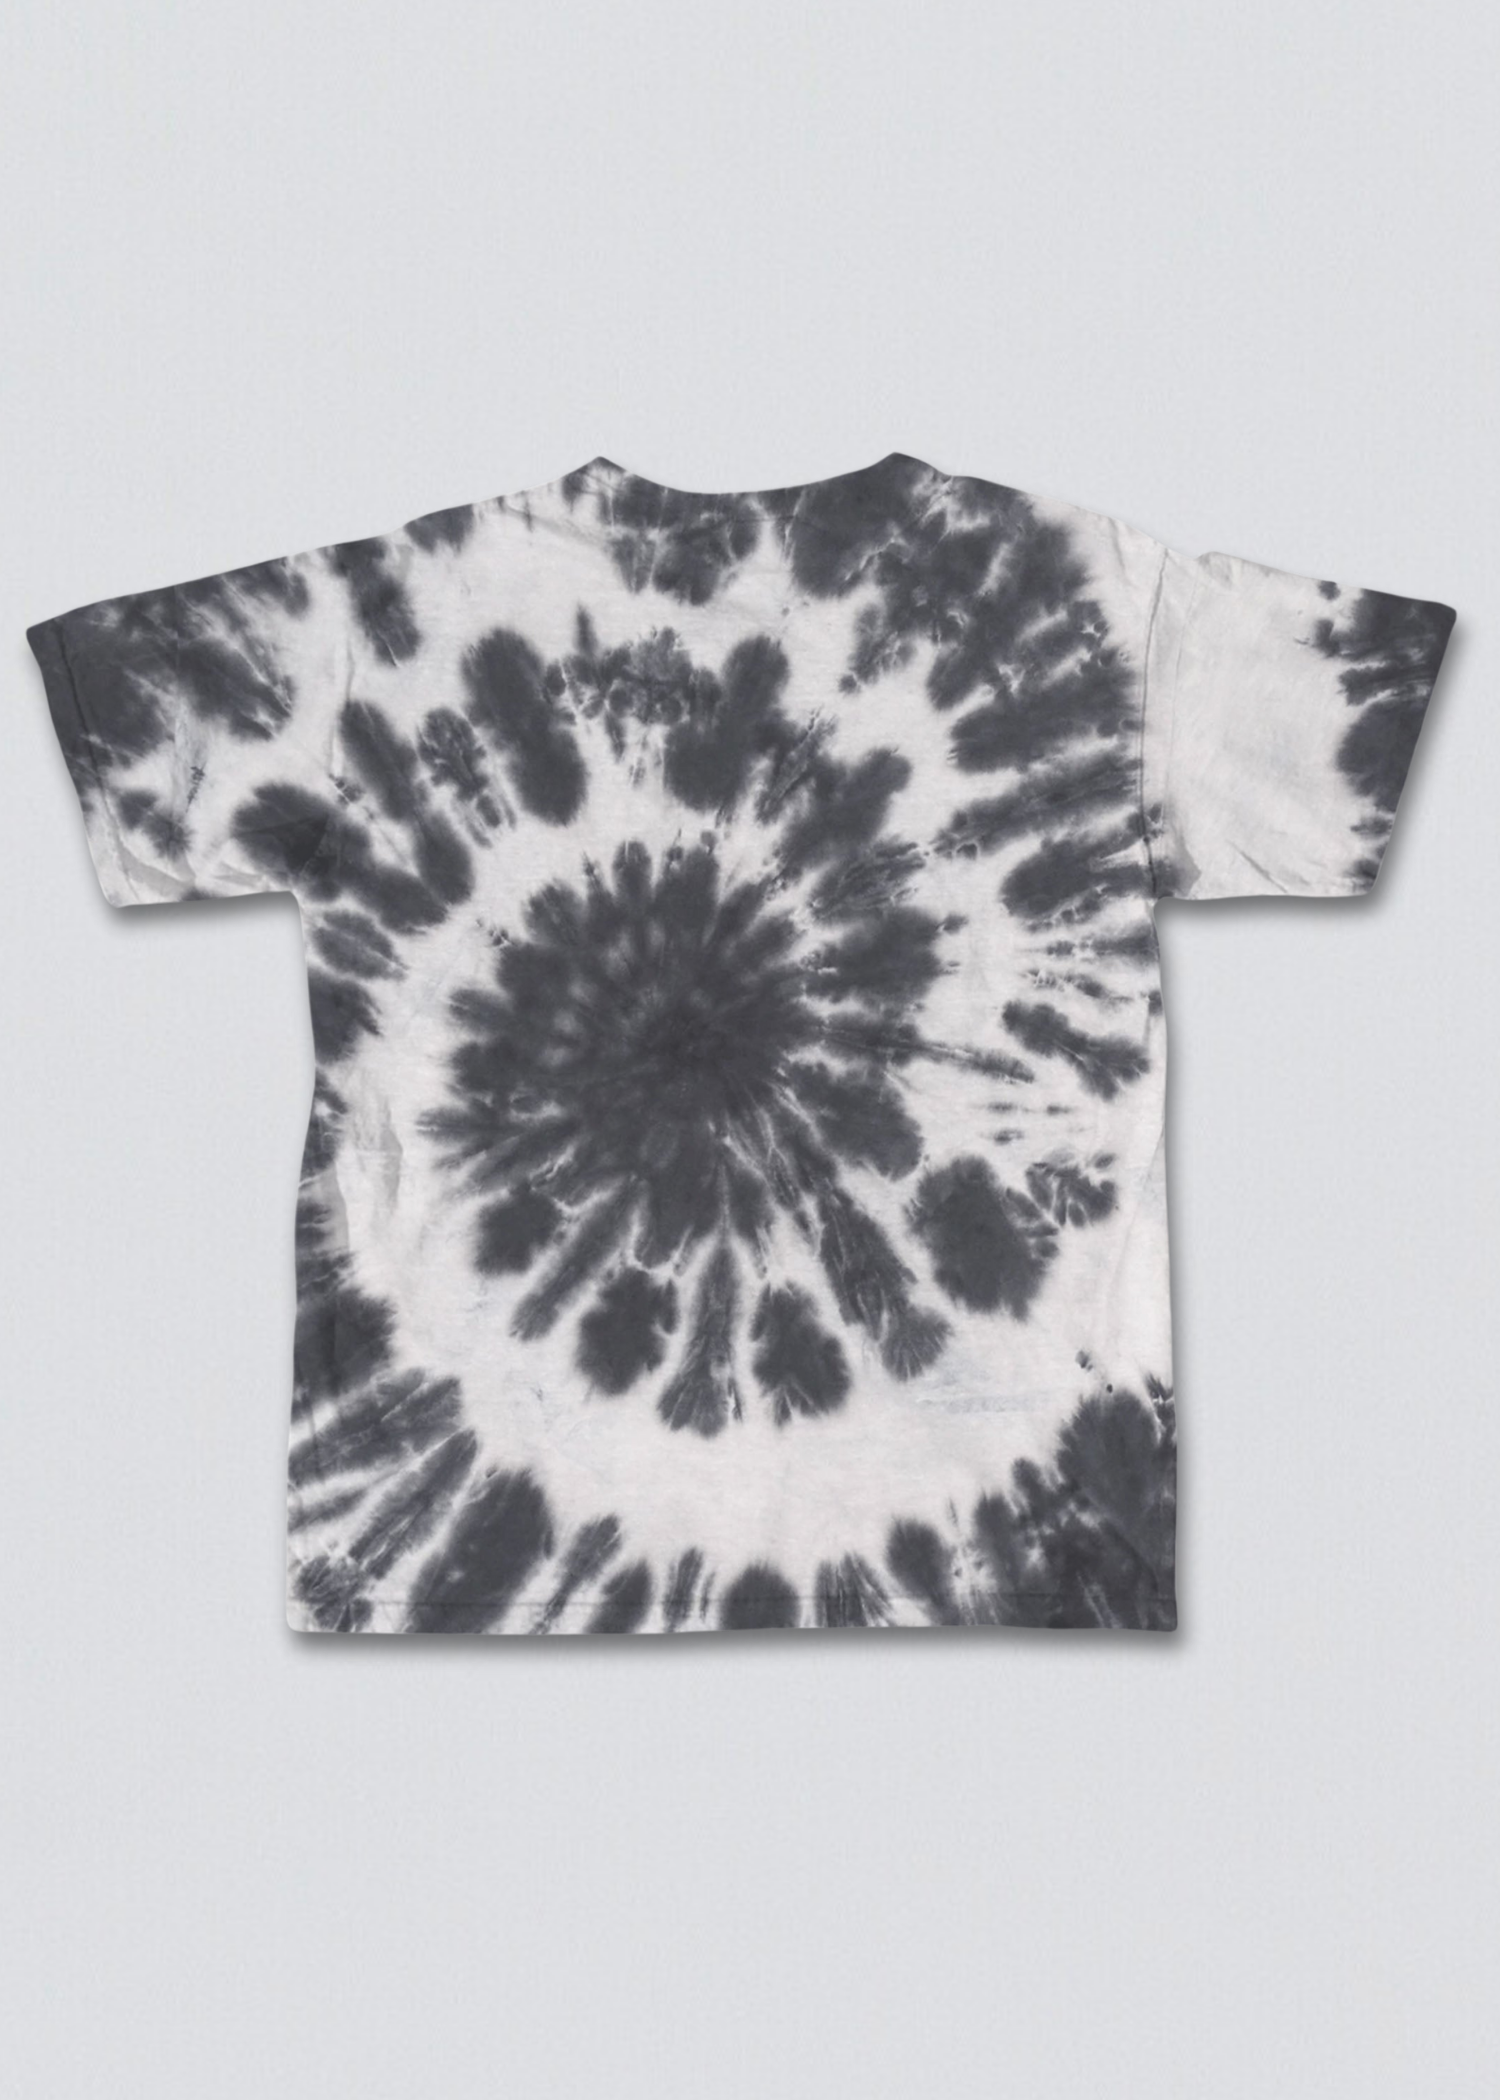 Life is a Dream Skull Tie-Dye Graphic Tee